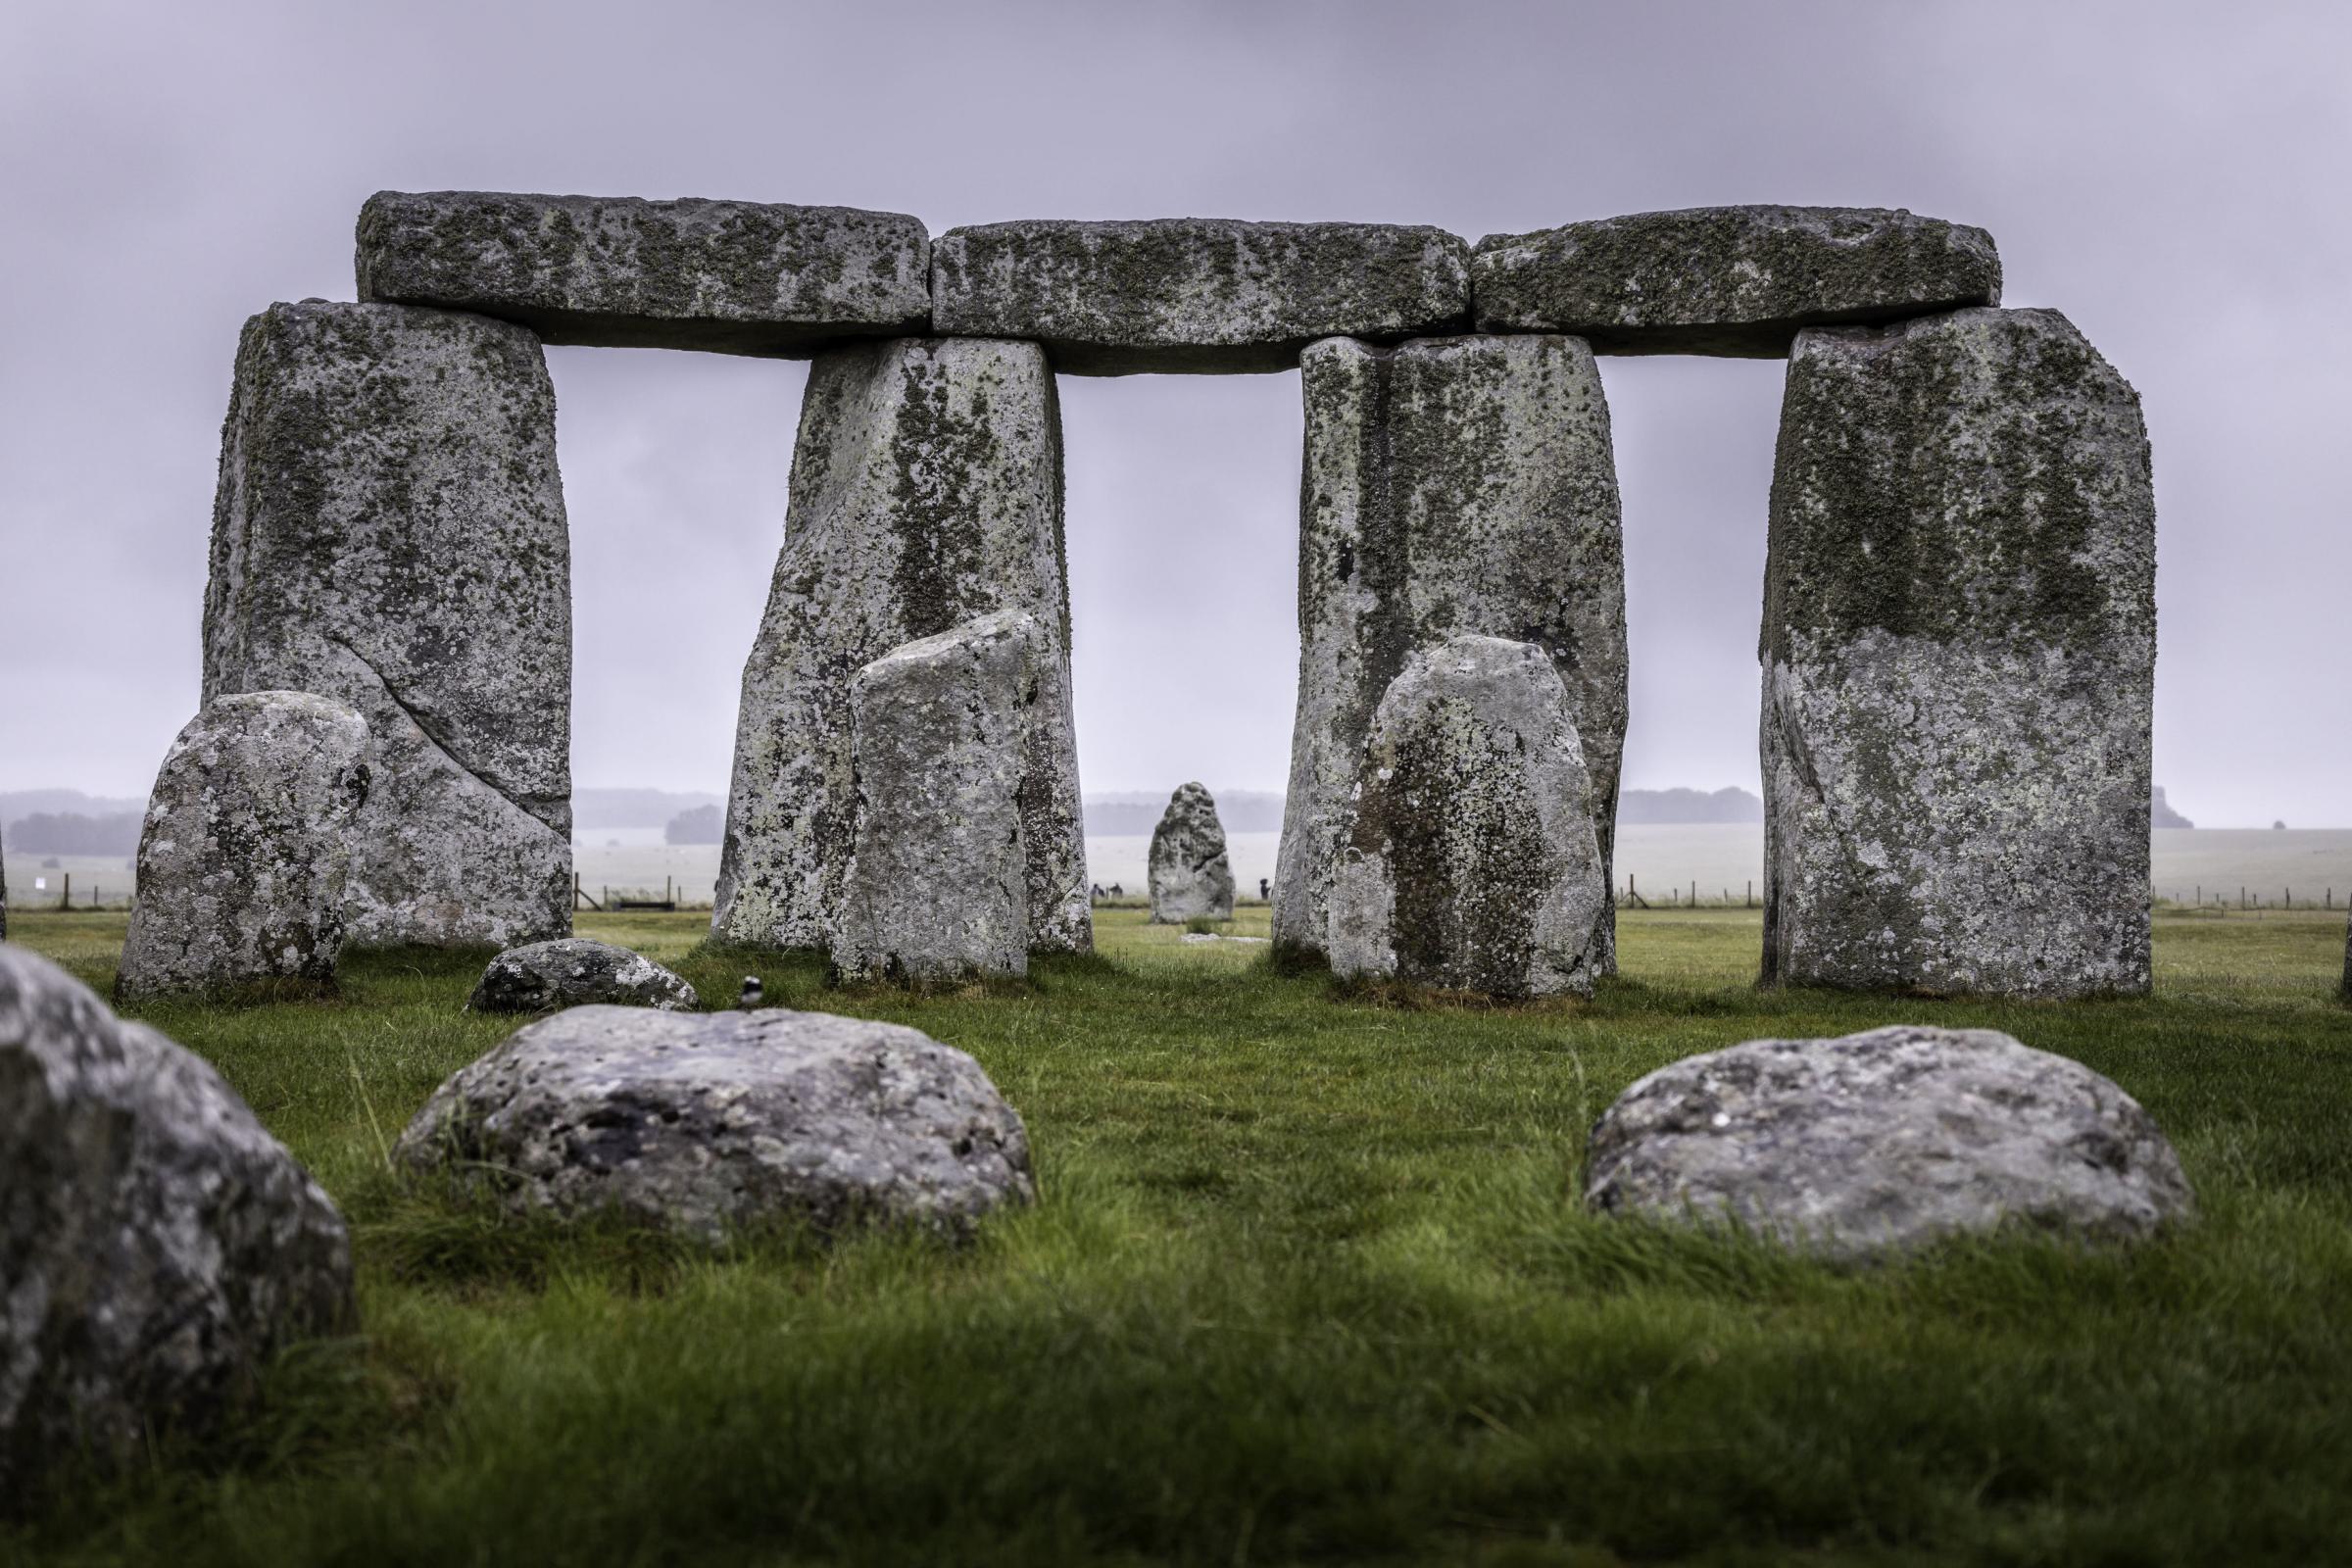 Handout photo issued by English Heritage of Stonehenge in Wiltshire, during a soggy start after the shortest night of the year, as more than 3.6 million people around the world tuned in to a livestream from Stonehenge on Saturday night and Sunday morning